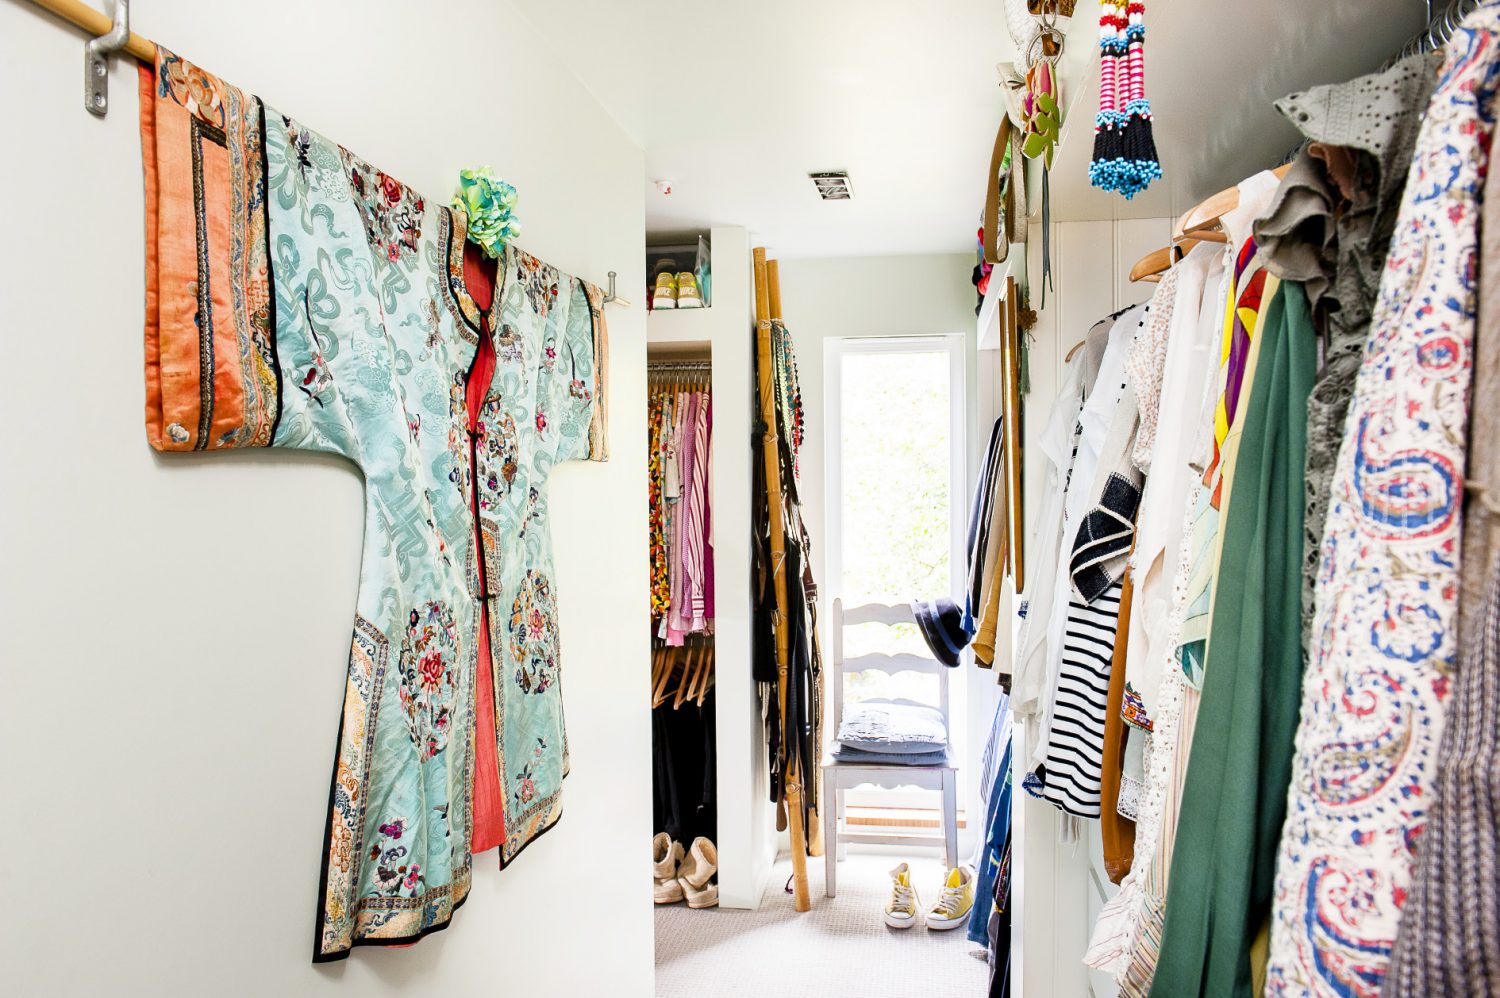 A kimono hangs on the wall of the dressing room